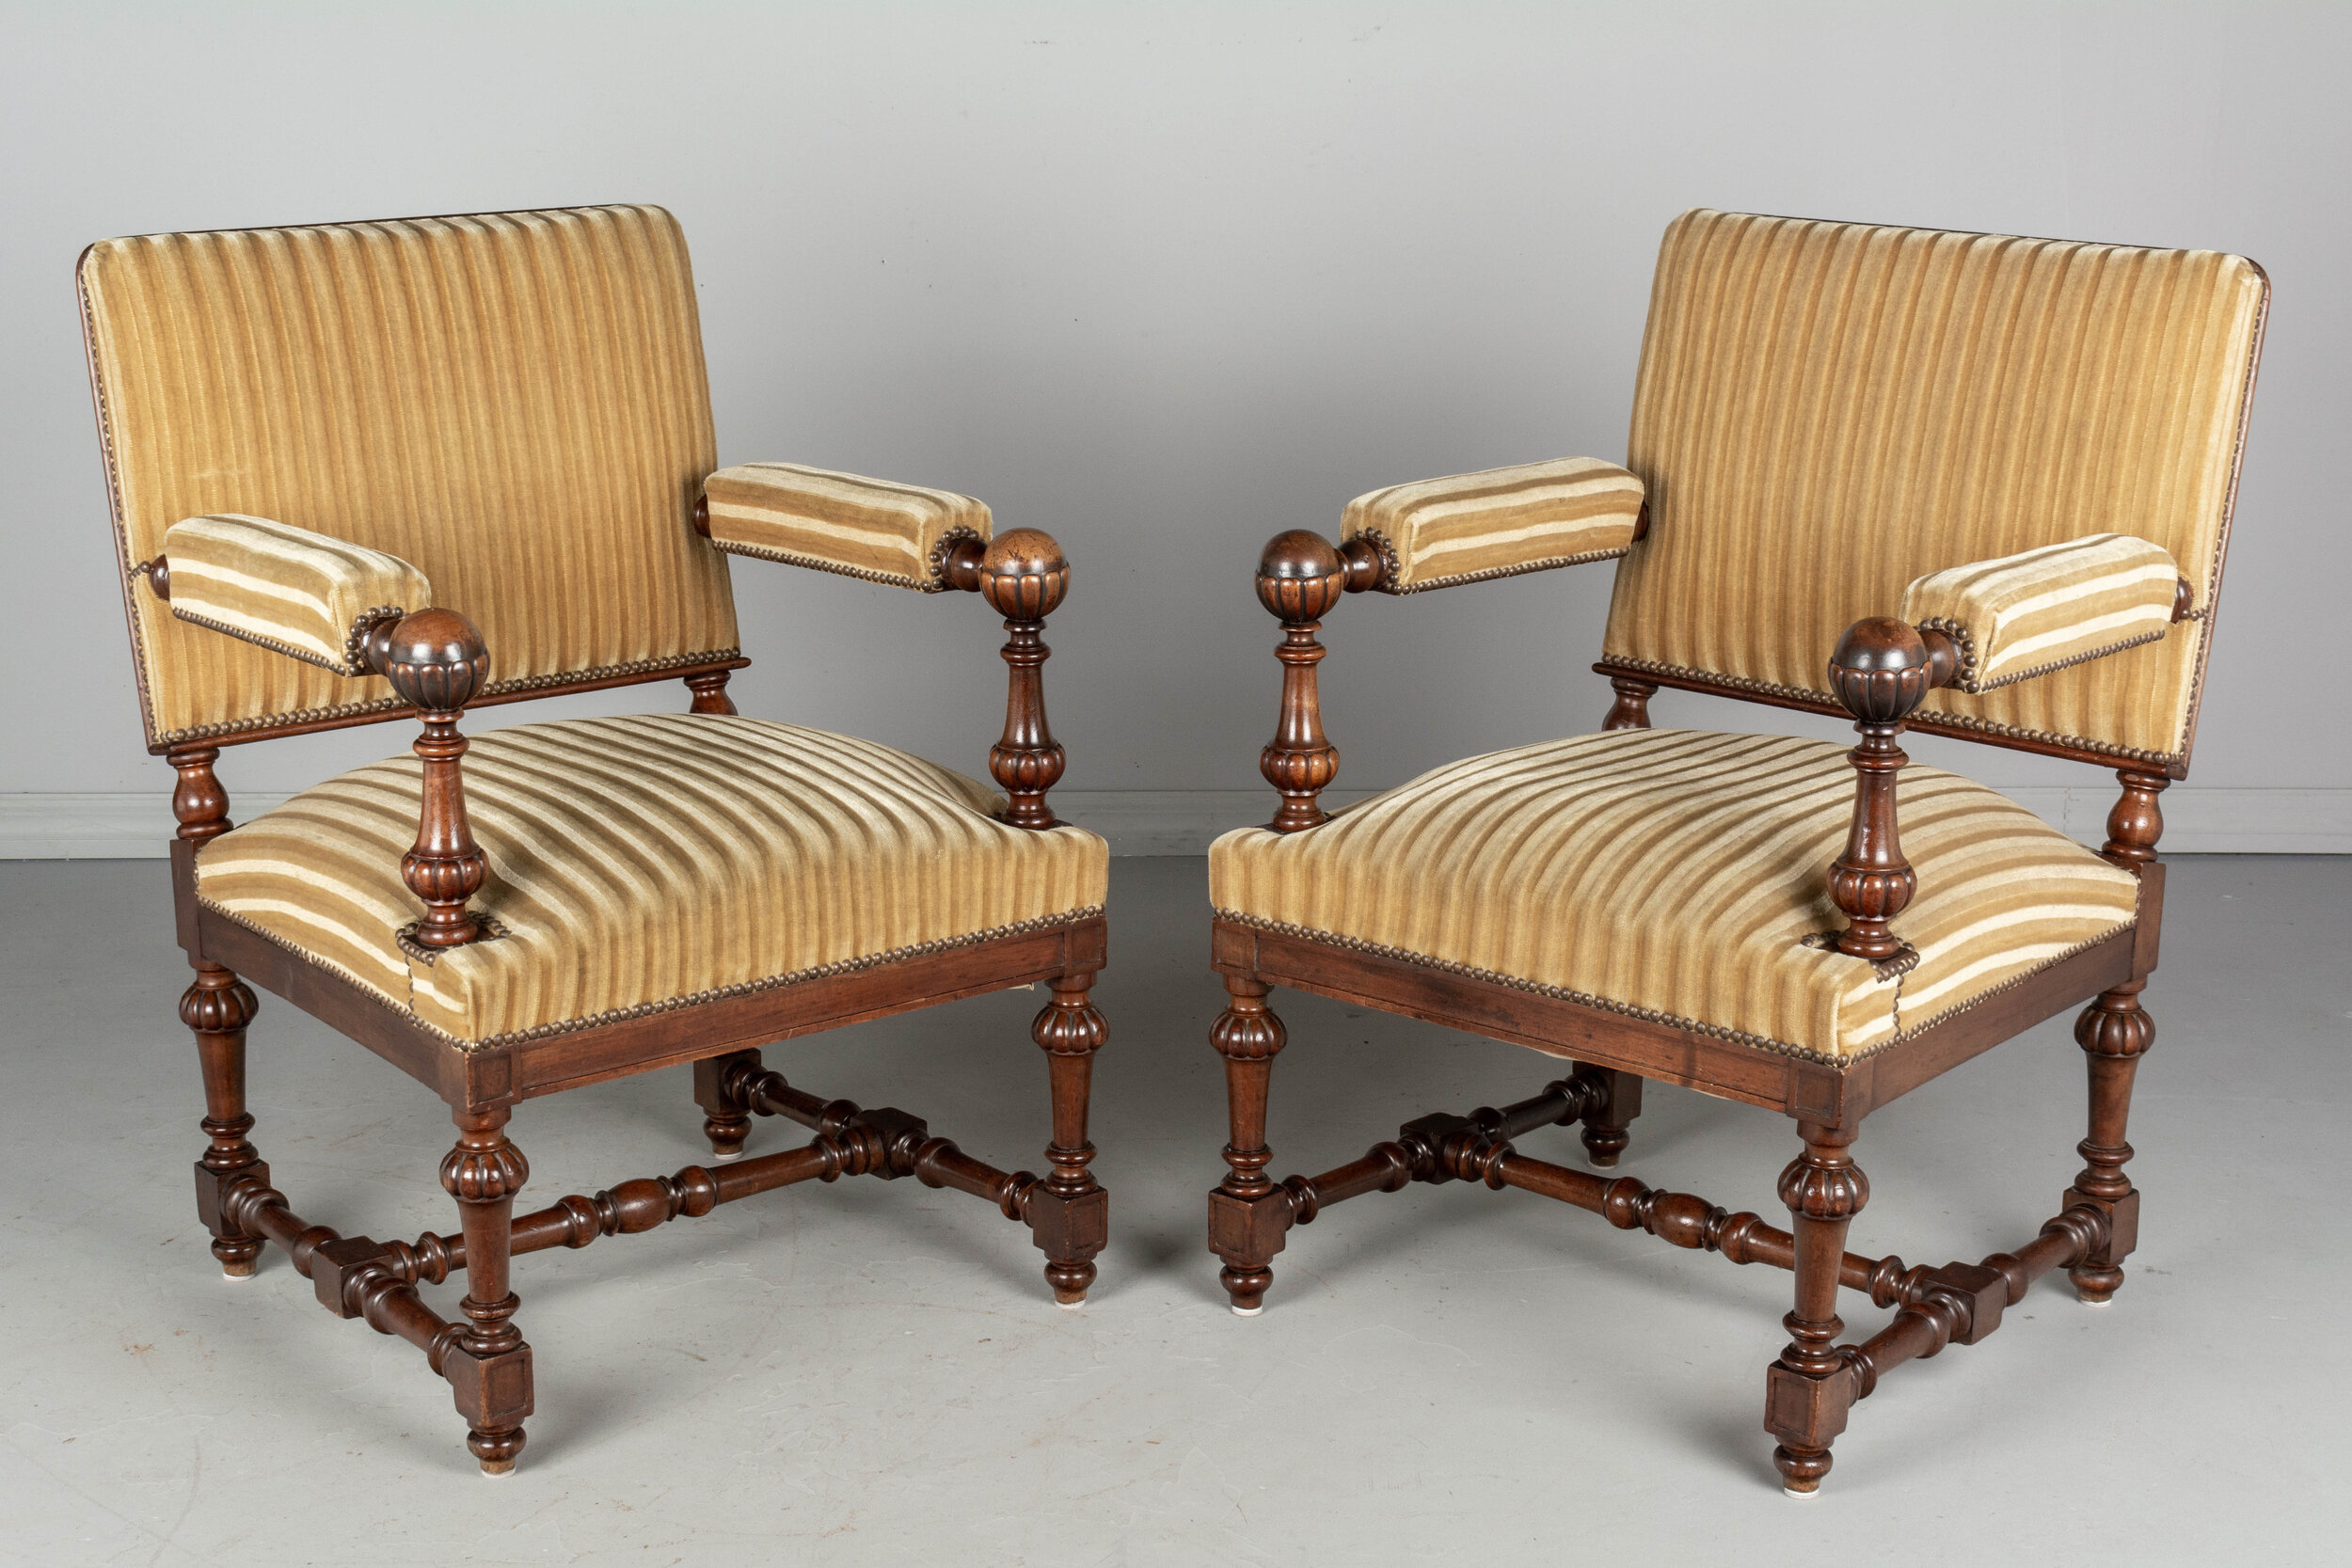 Antique Dining Chairs Louis XVI French Walnut Wood Cane Rattan 1900